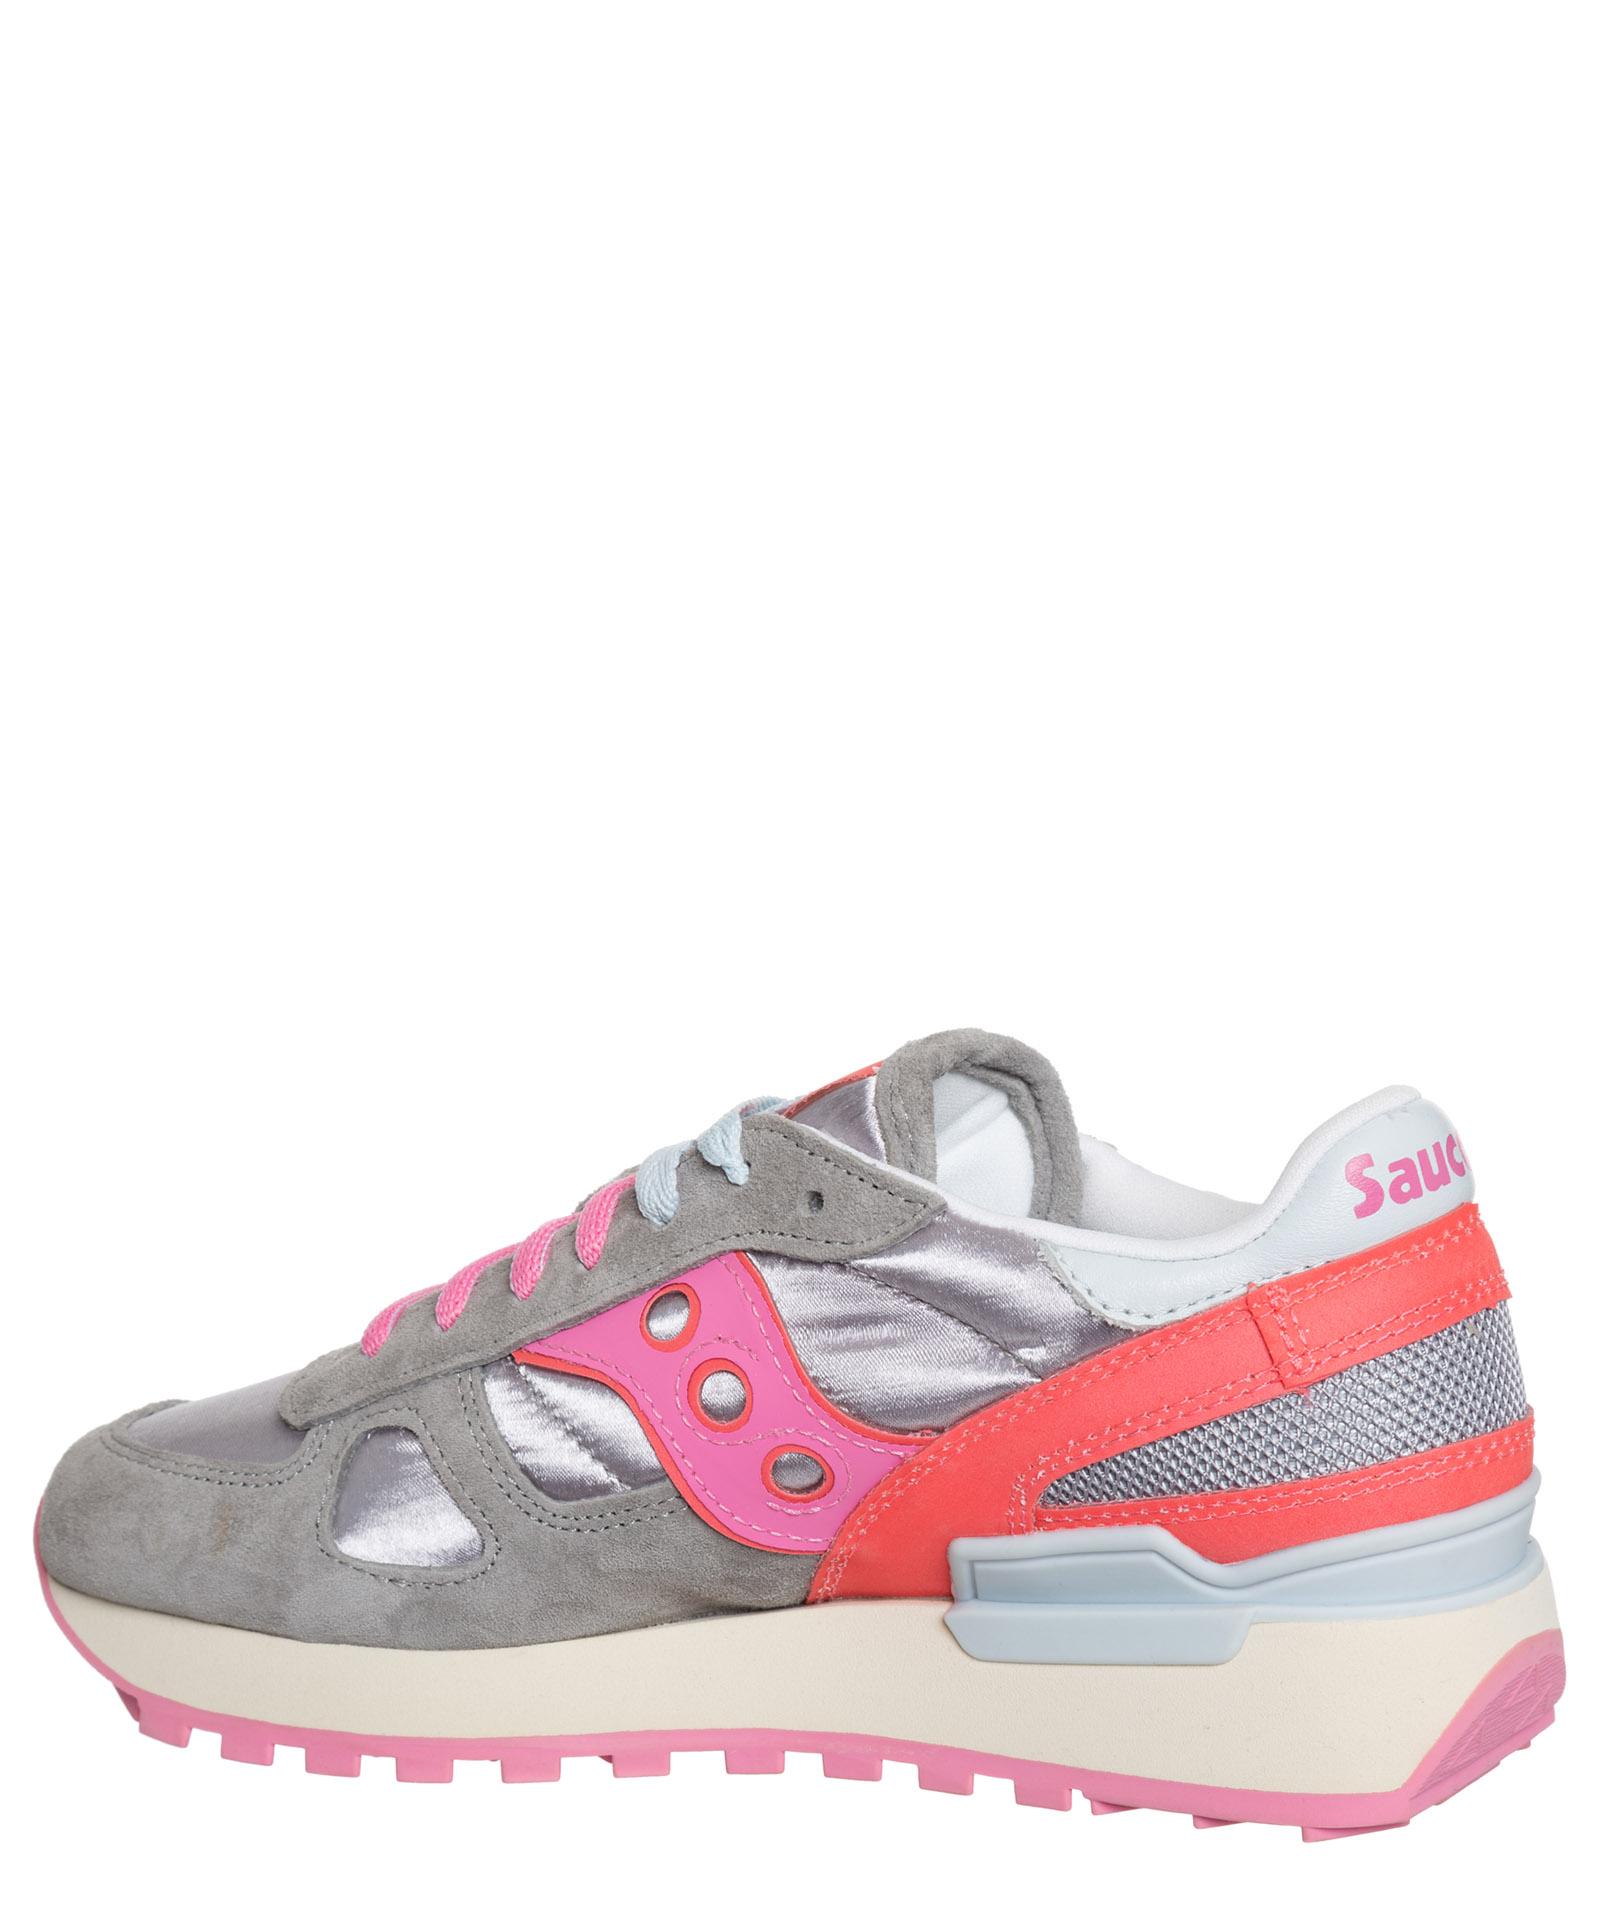 Saucony Shadow Original Leather Sneakers in Pink | Lyst